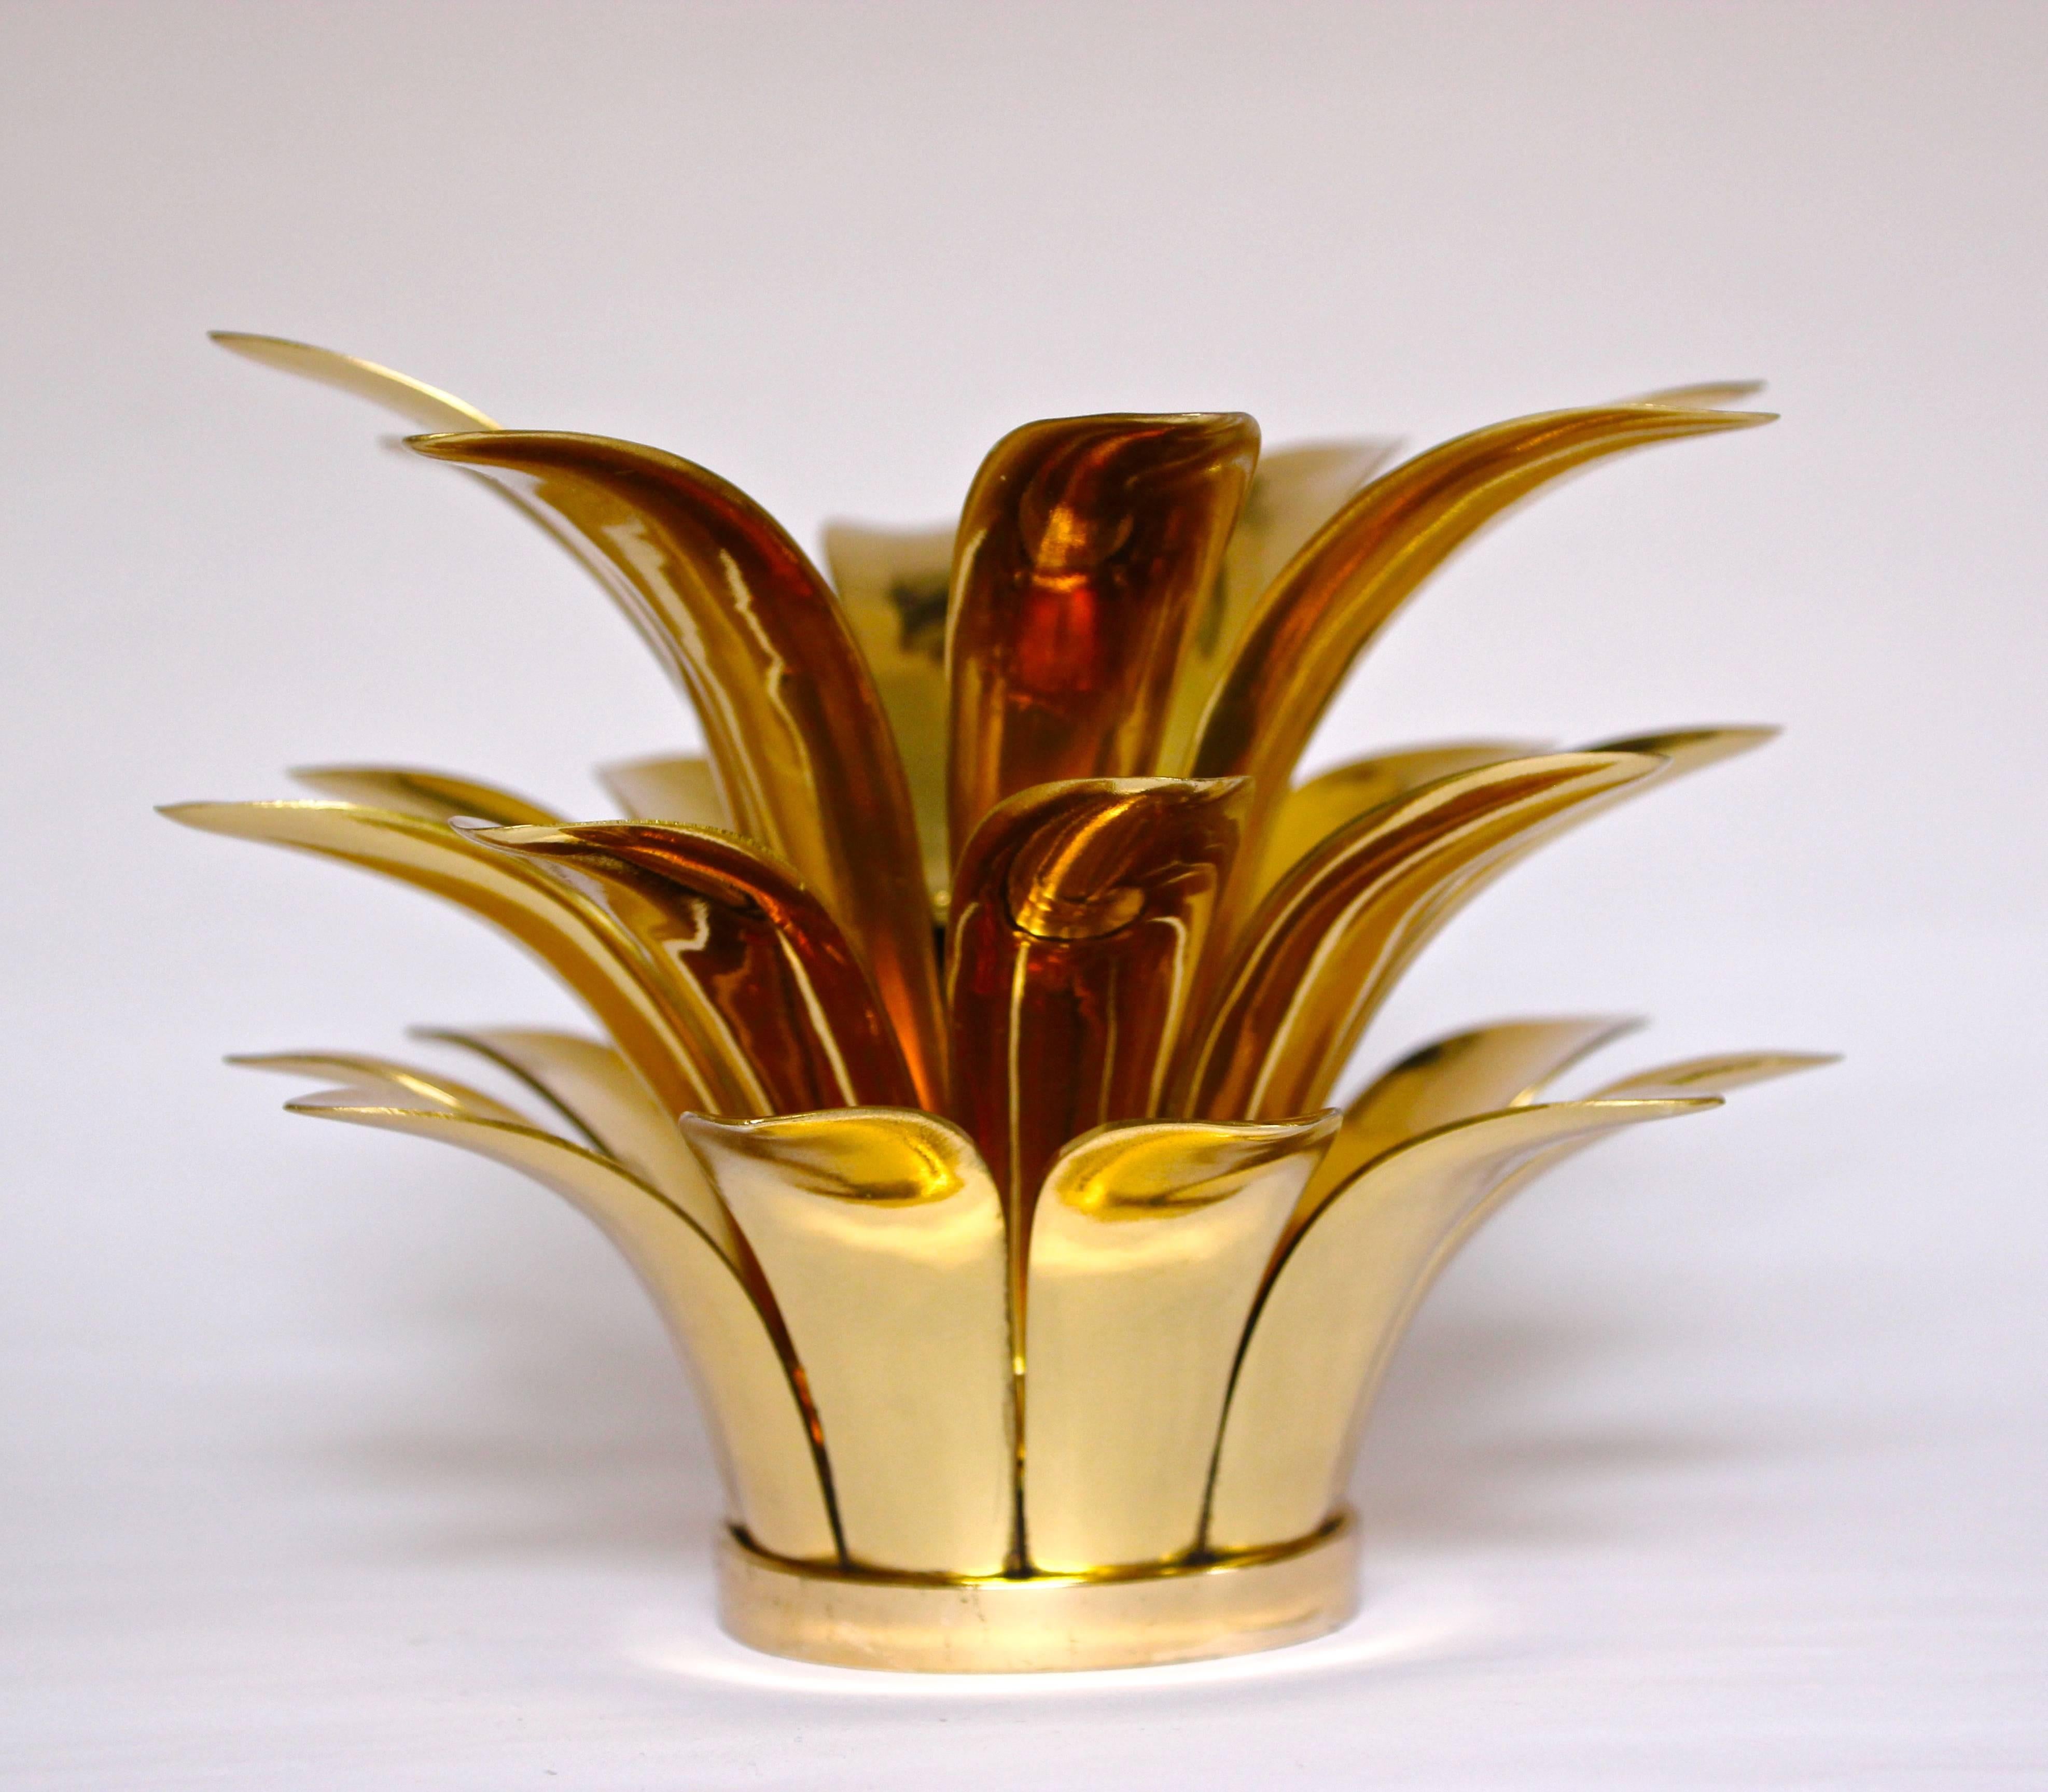 Charming and ingenious handmade cast polished brass candle holder inspired by a pineapple. May be used with tapered candles or T-lights.

Handmade individually. Cast using very traditional techniques, those original candleholders are polished